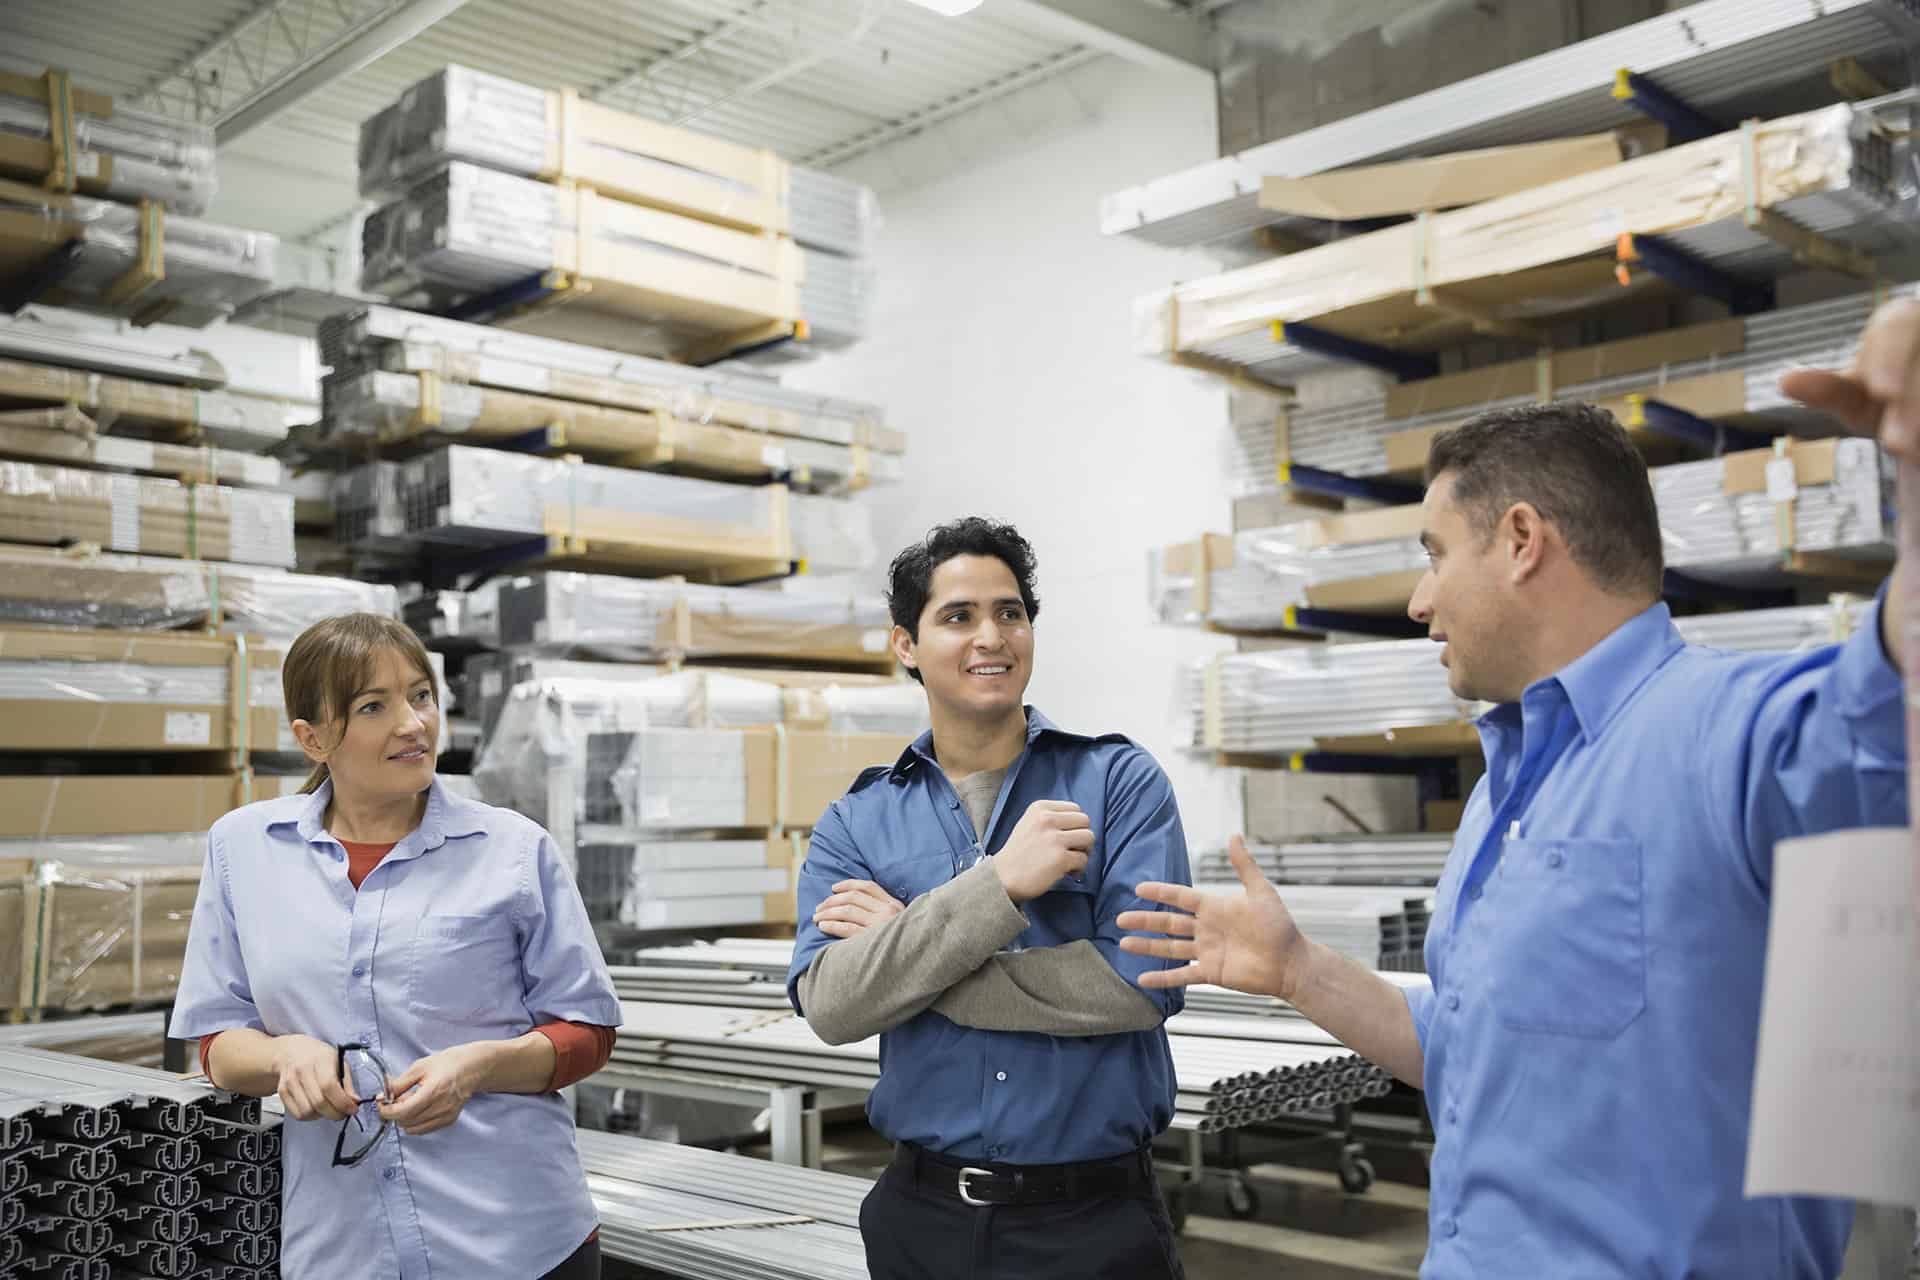 Worker explaining to colleagues in warehouse